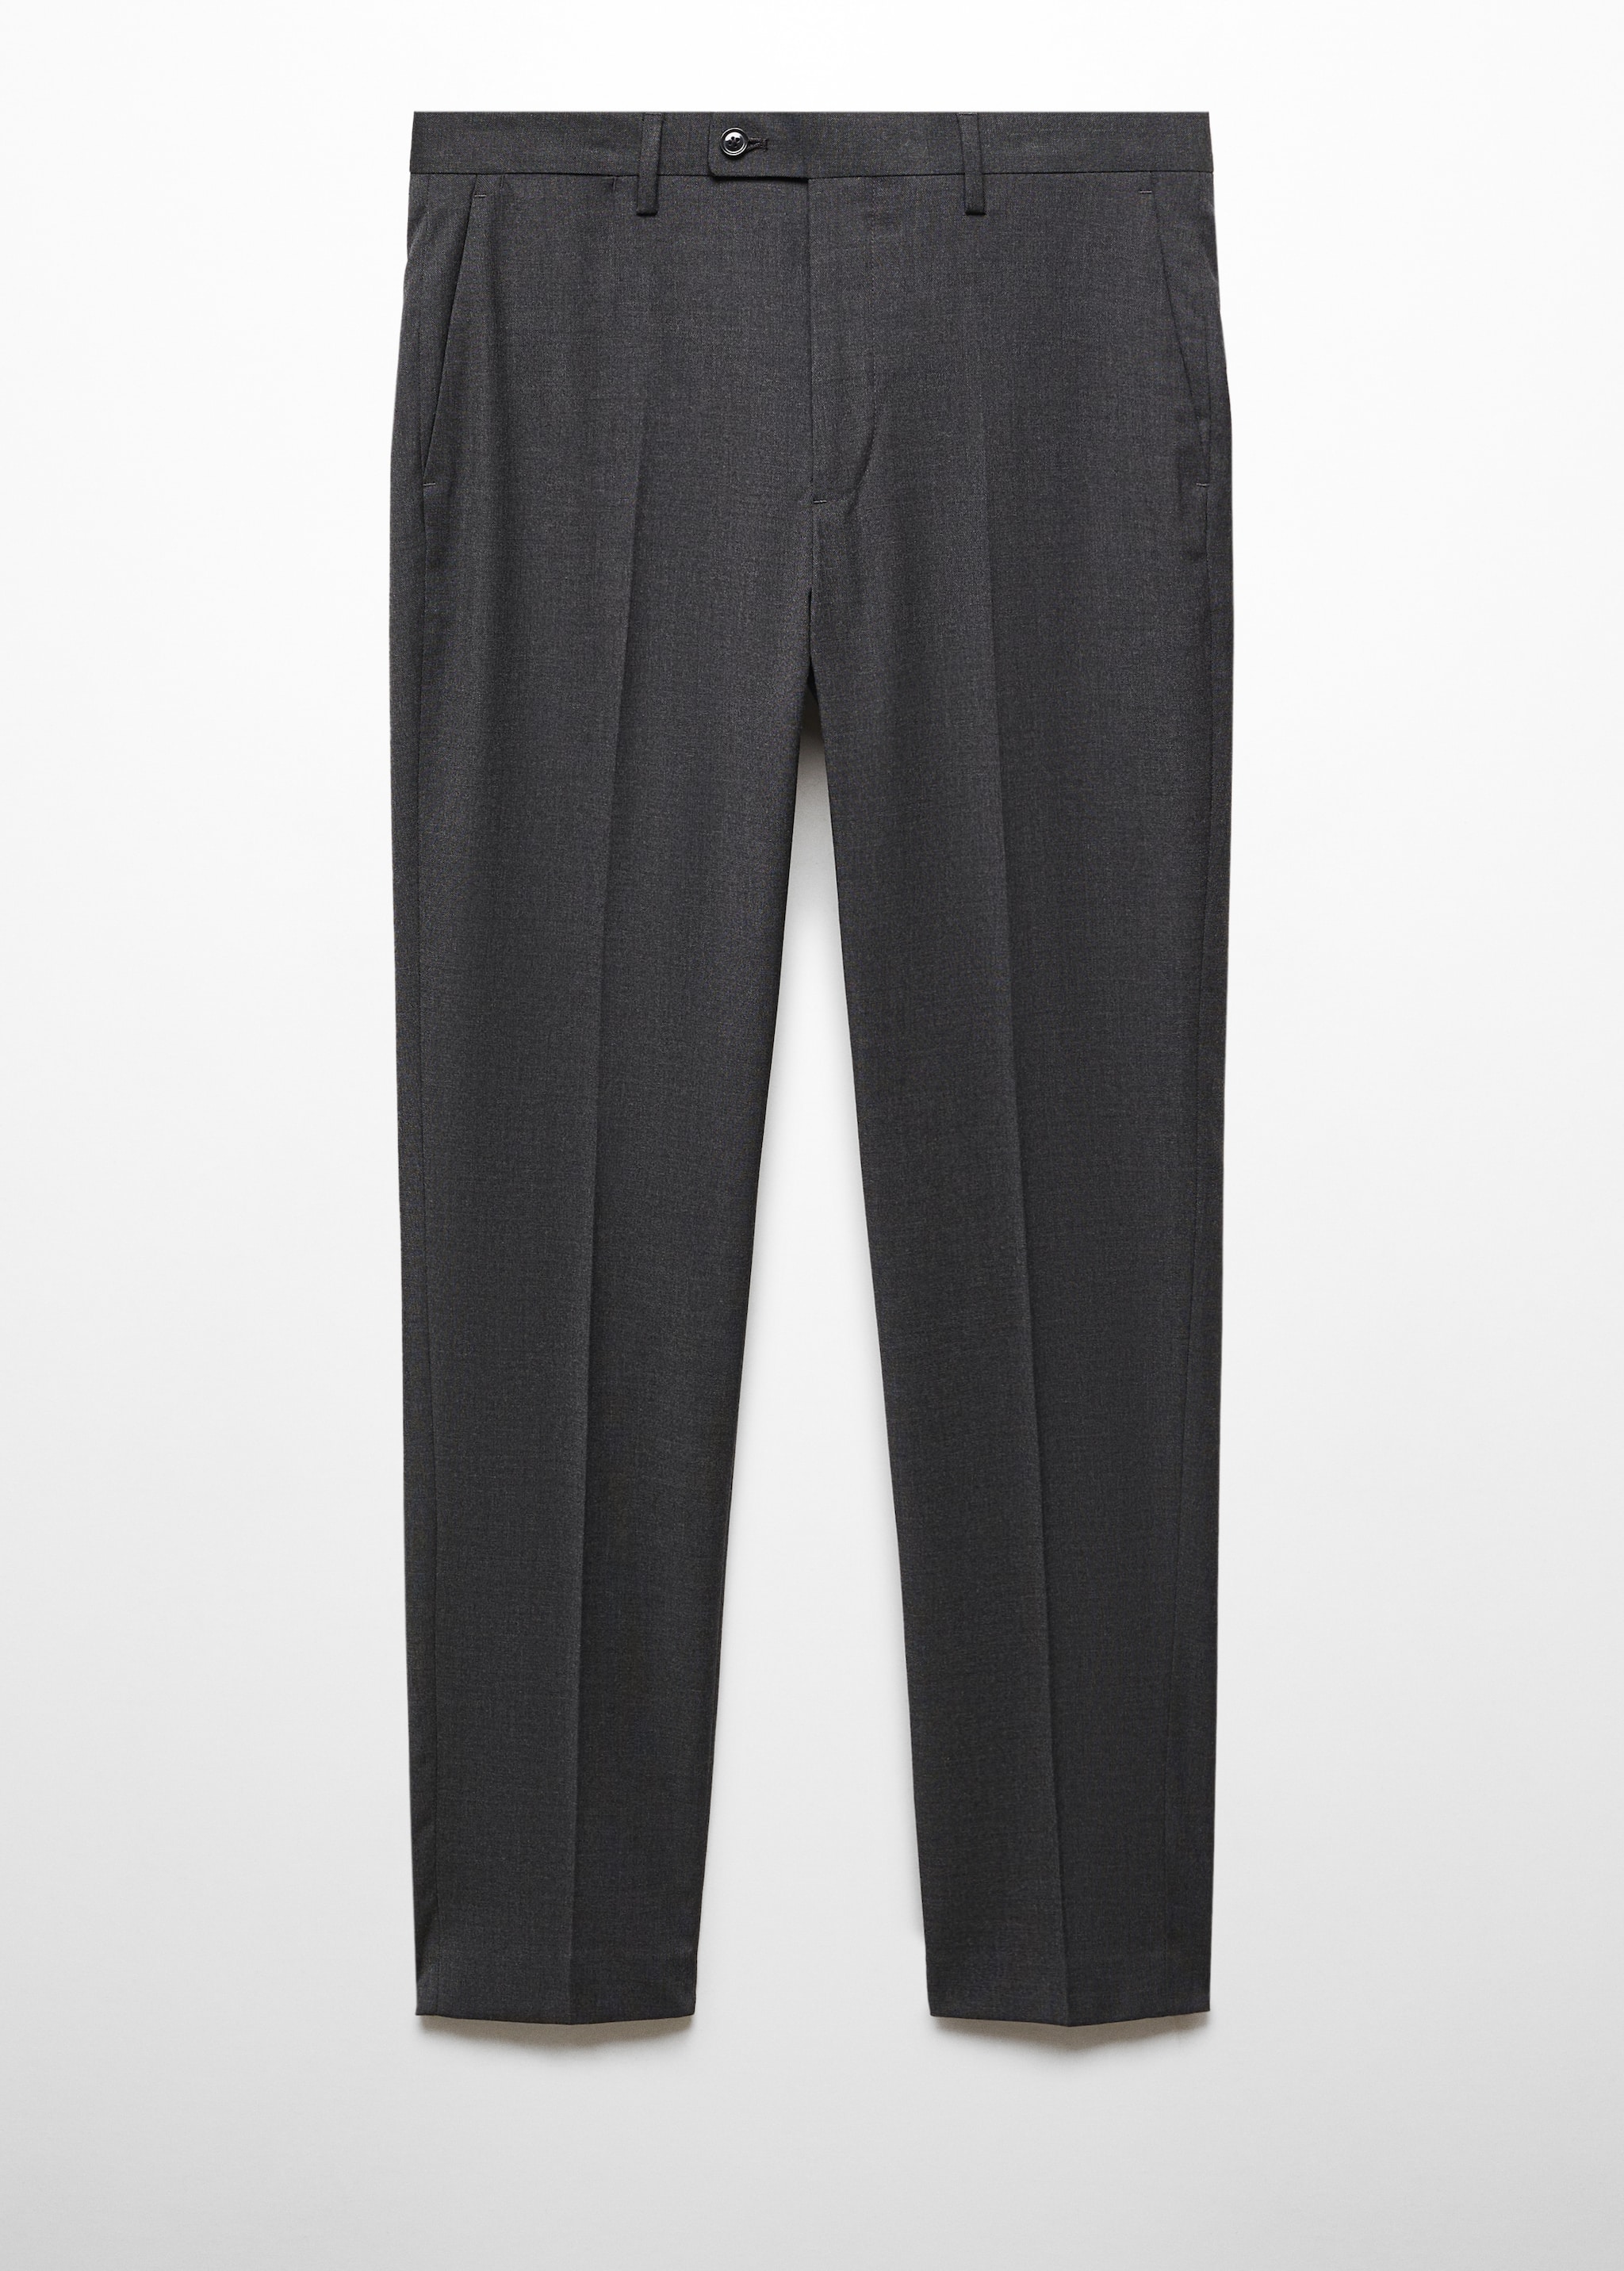  Suit trousers - Article without model